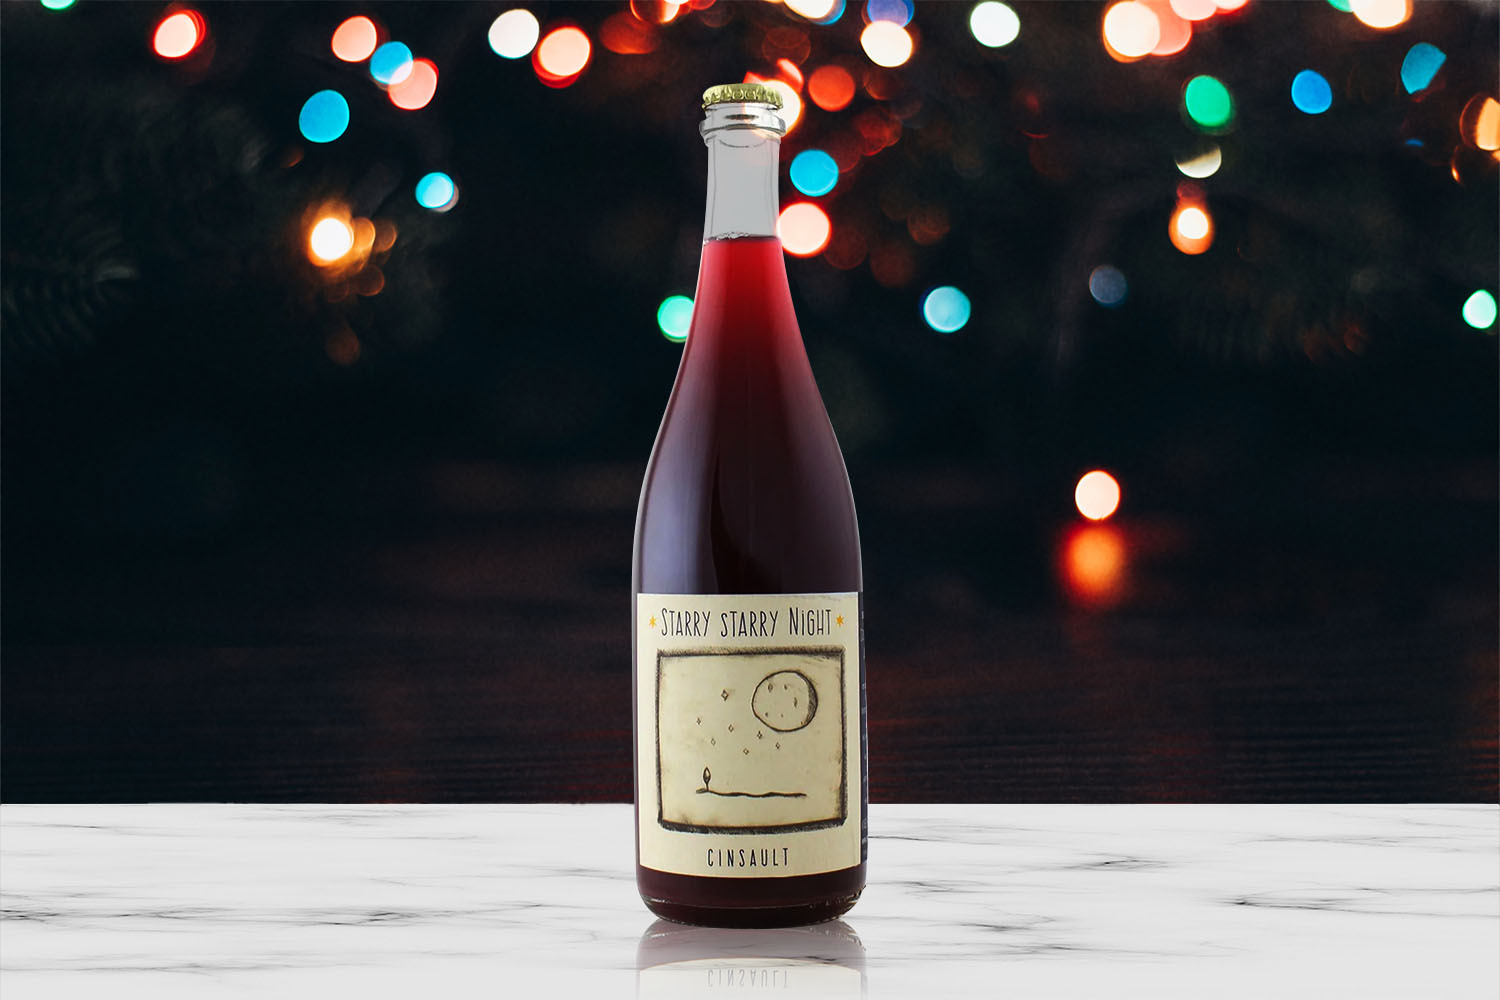 Smallfry 2022 Starry Starry Night Cinsault in front of holiday lights